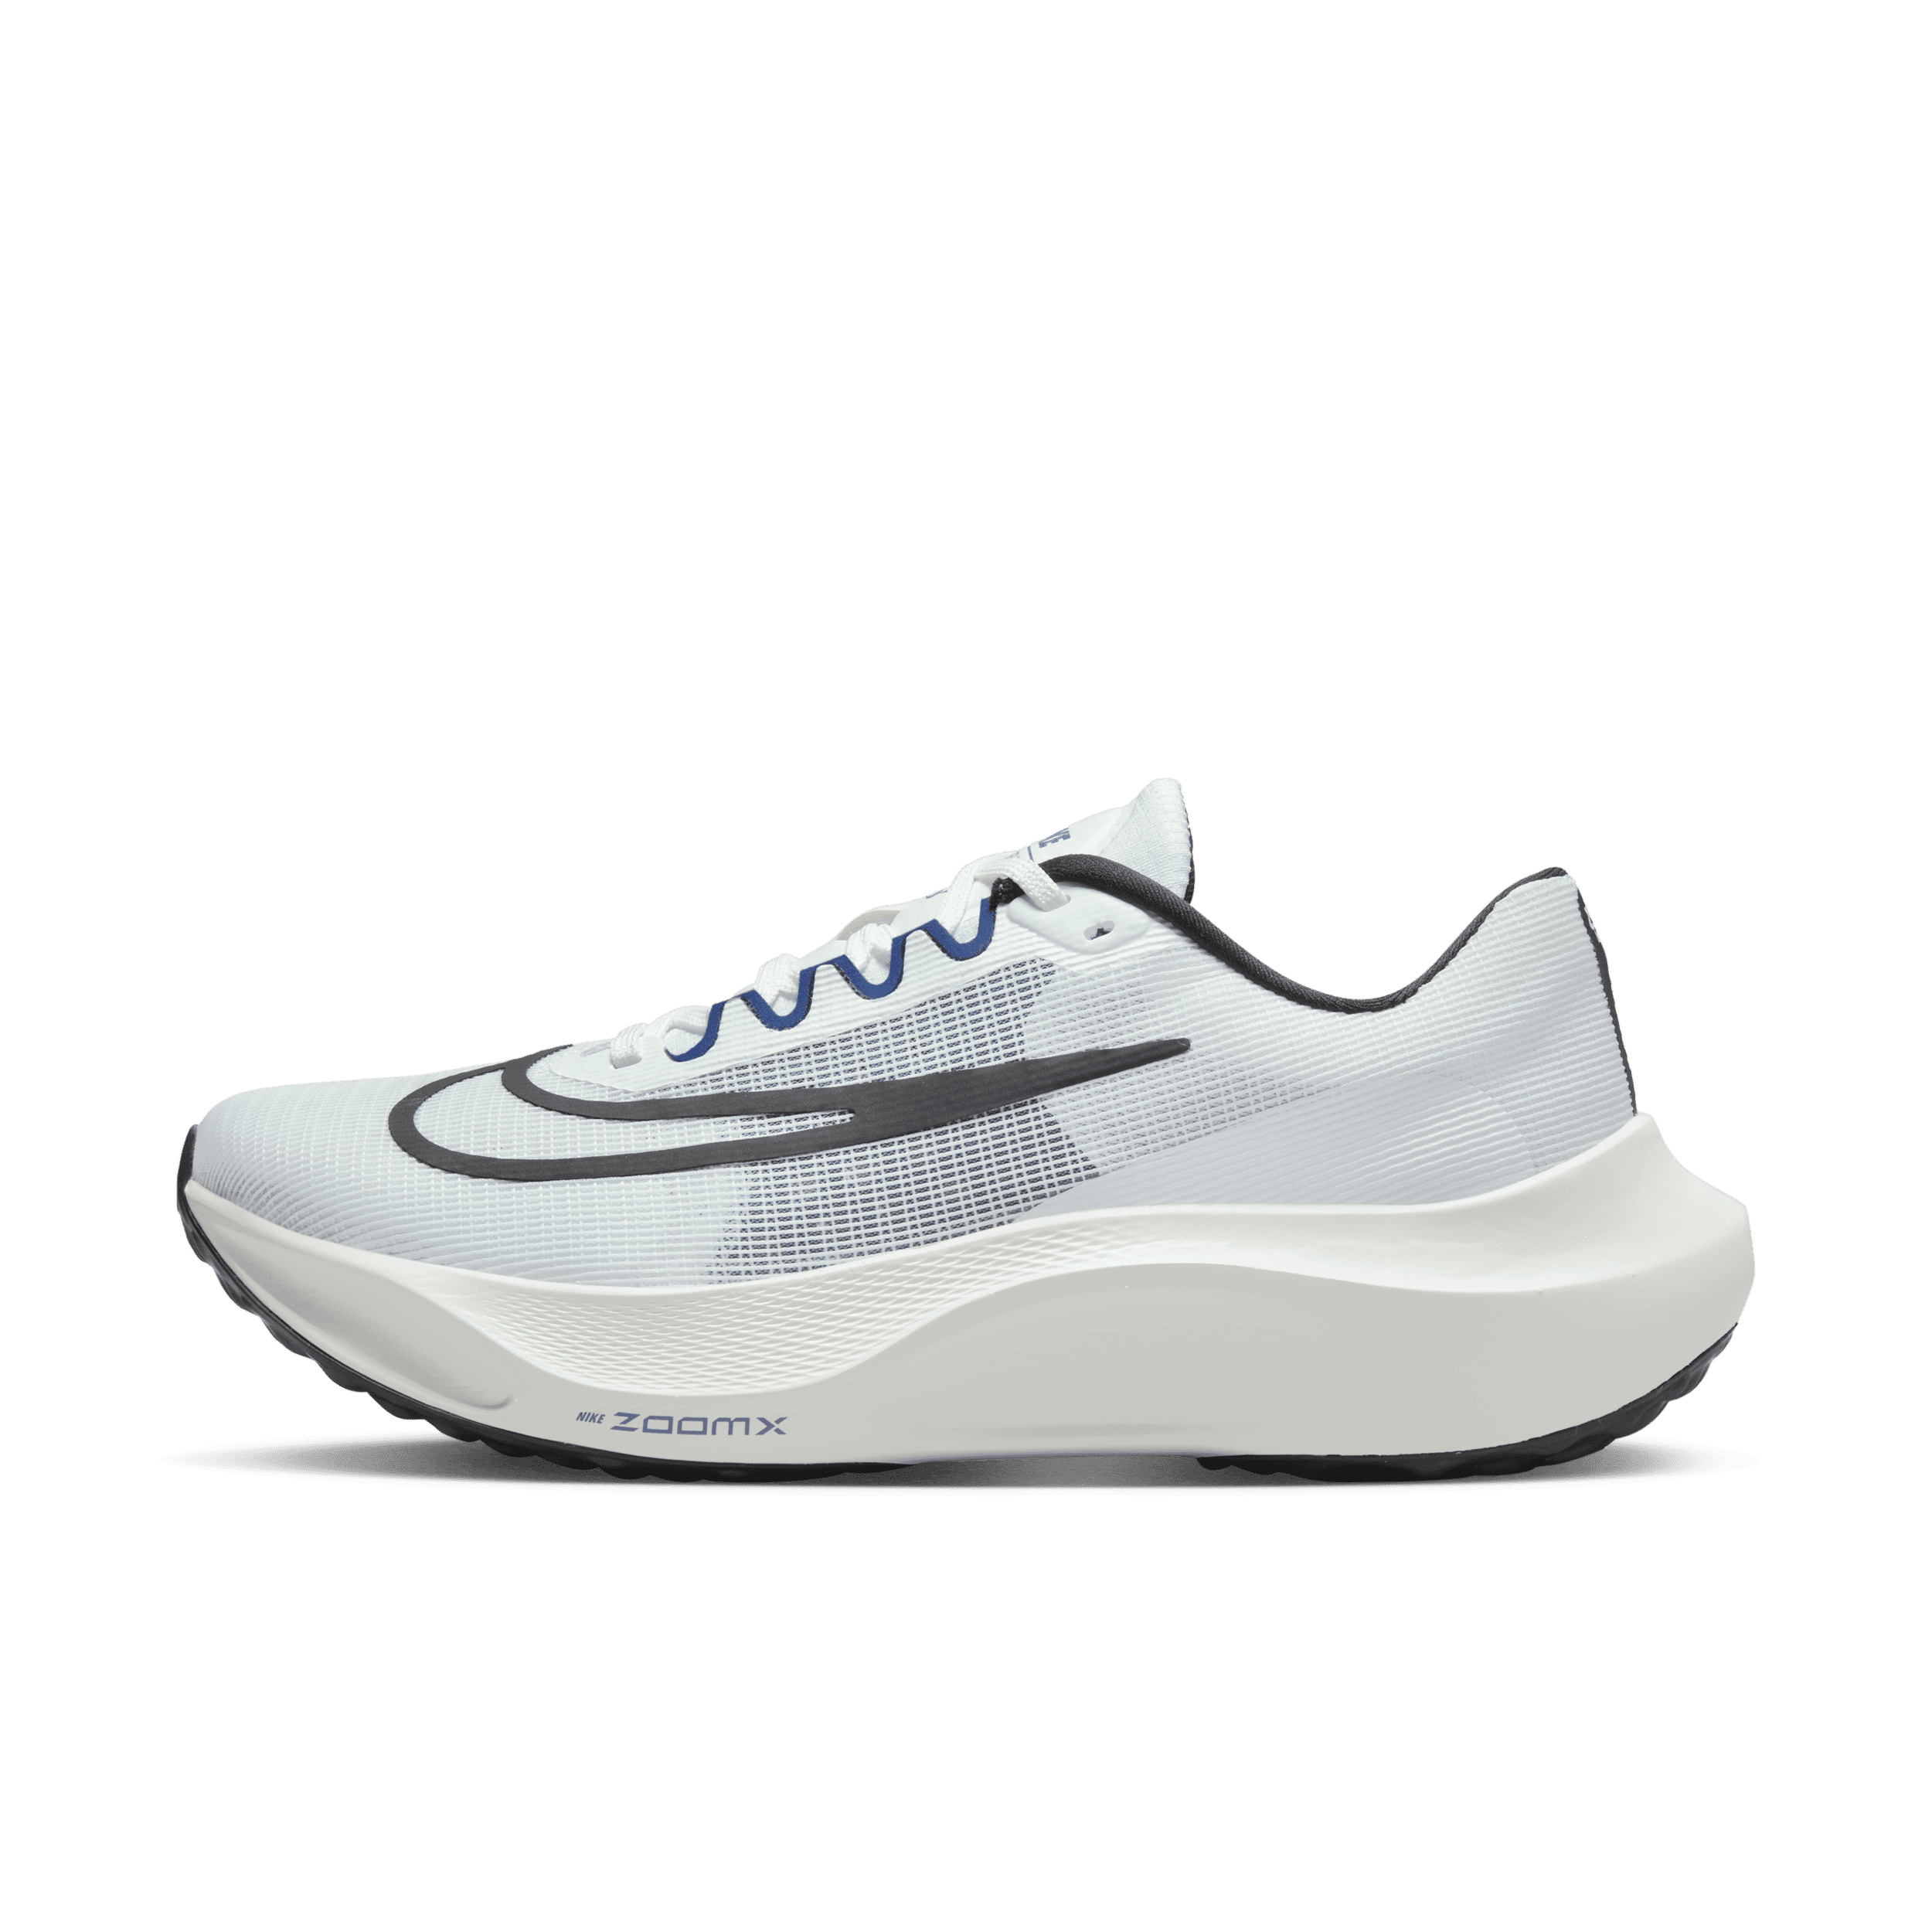 Chaussure de running Nike Zoom Fly 5 pour homme - Blanc